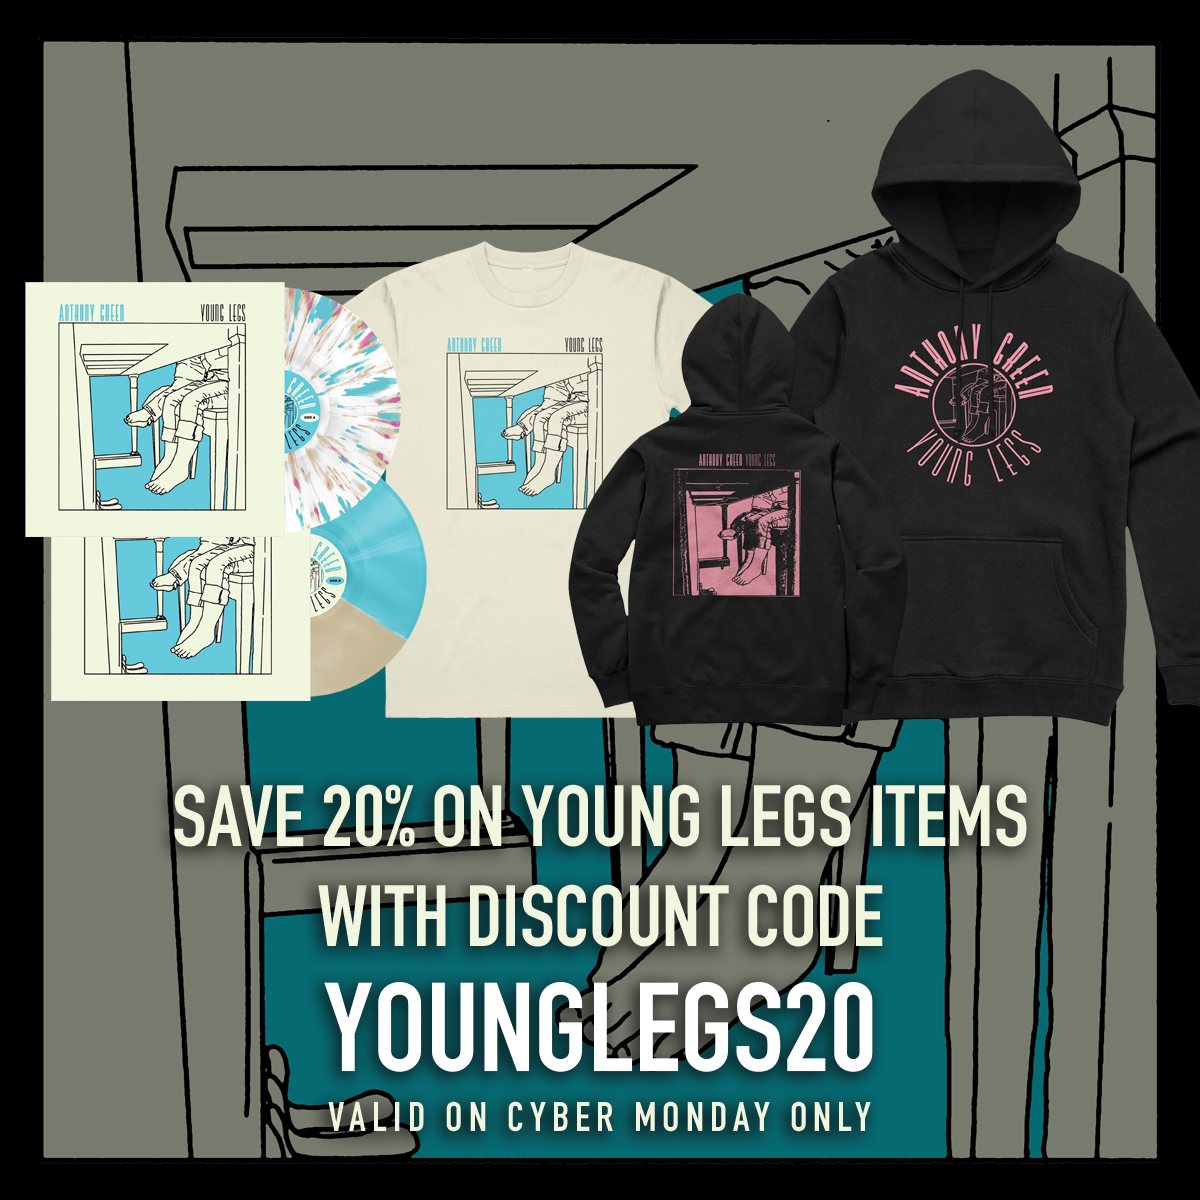 Save 20% on Young Legs 10 Year Anniversary Vinyl and Apparel by using discount code 'YOUNGLEGS20' at checkout. Only valid through Monday, November 27. anthonygreenmerch.com